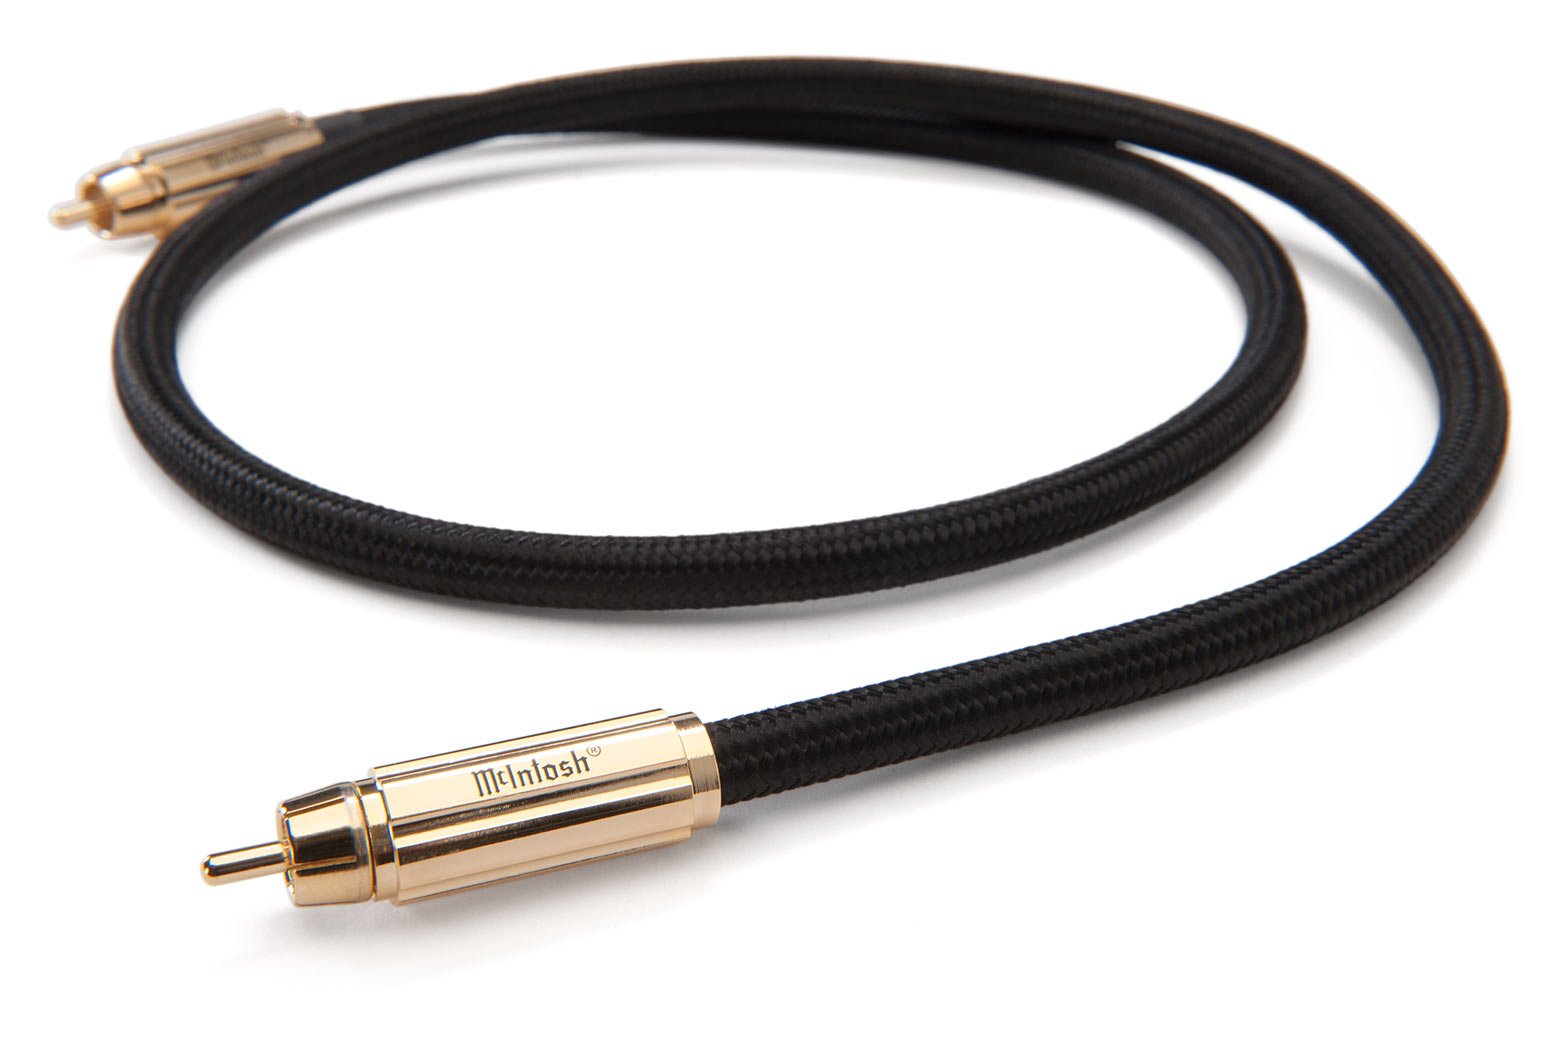 McIntosh Digital Audio Cables (In-Store Purchases Only & USD Pricing)  -  Sold as a Single